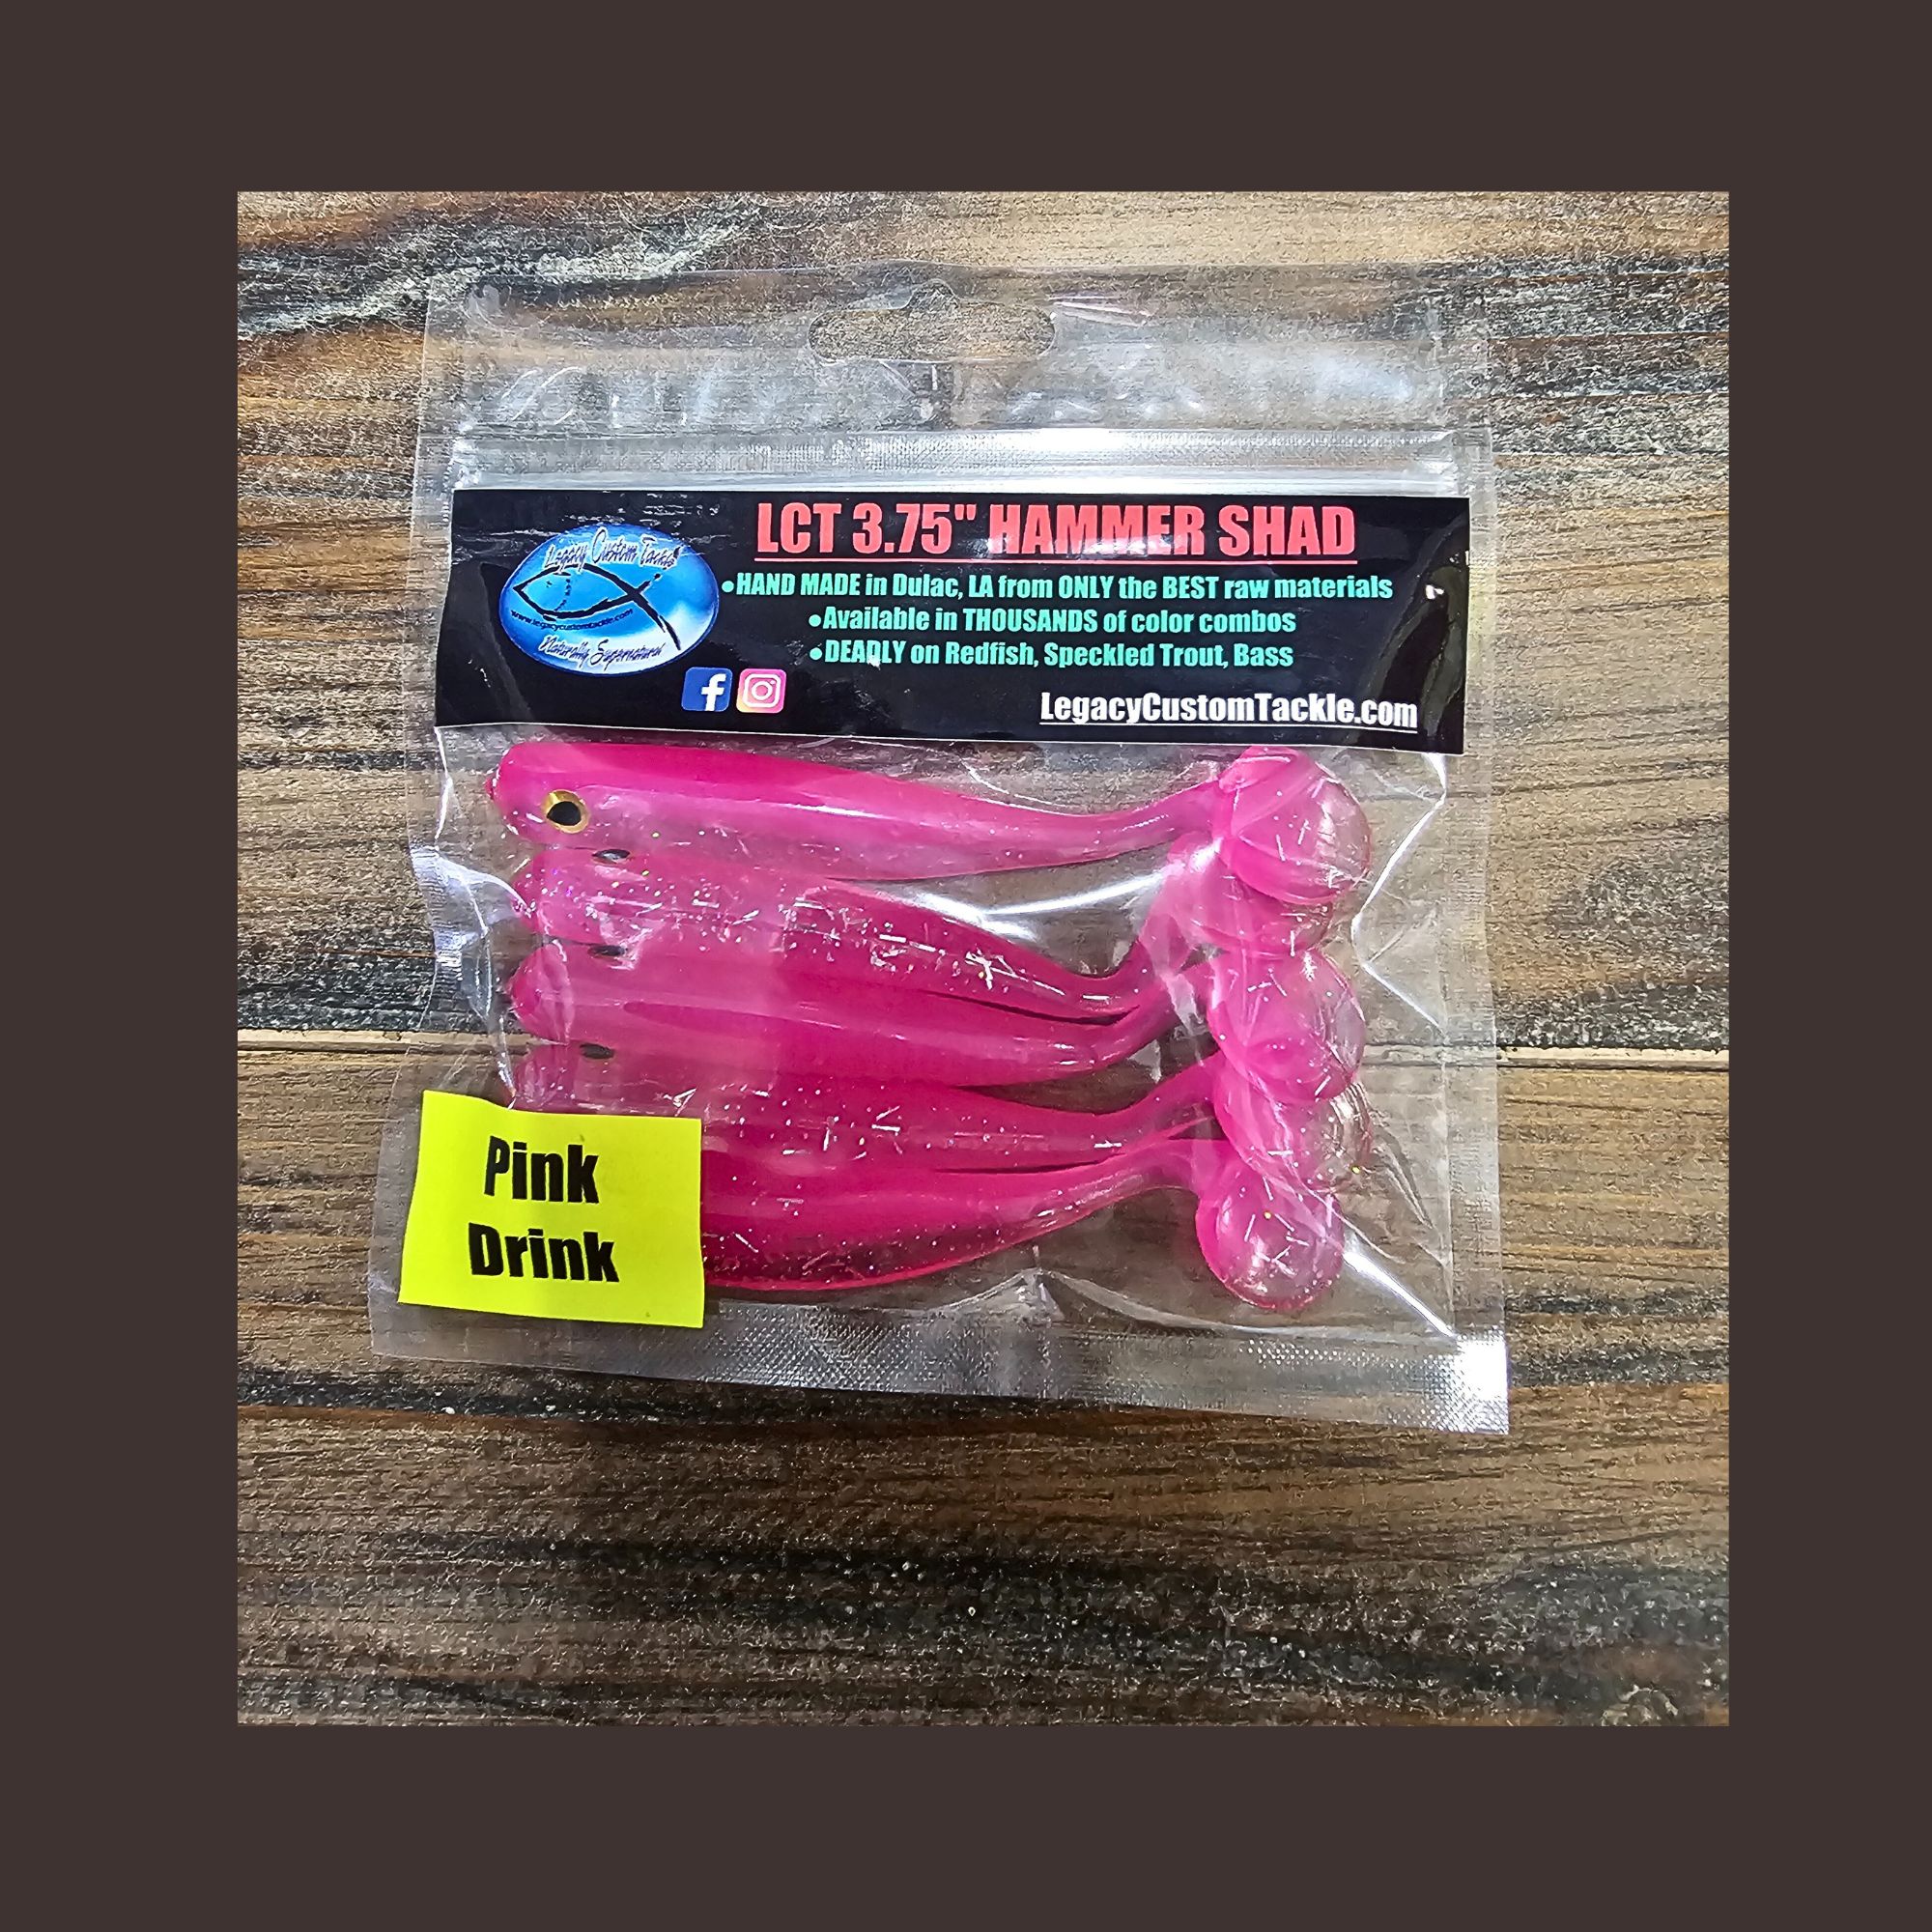 Hammer Shad Lures, Legacy Tackle, Red, Pink, Orange Baits, Fishing